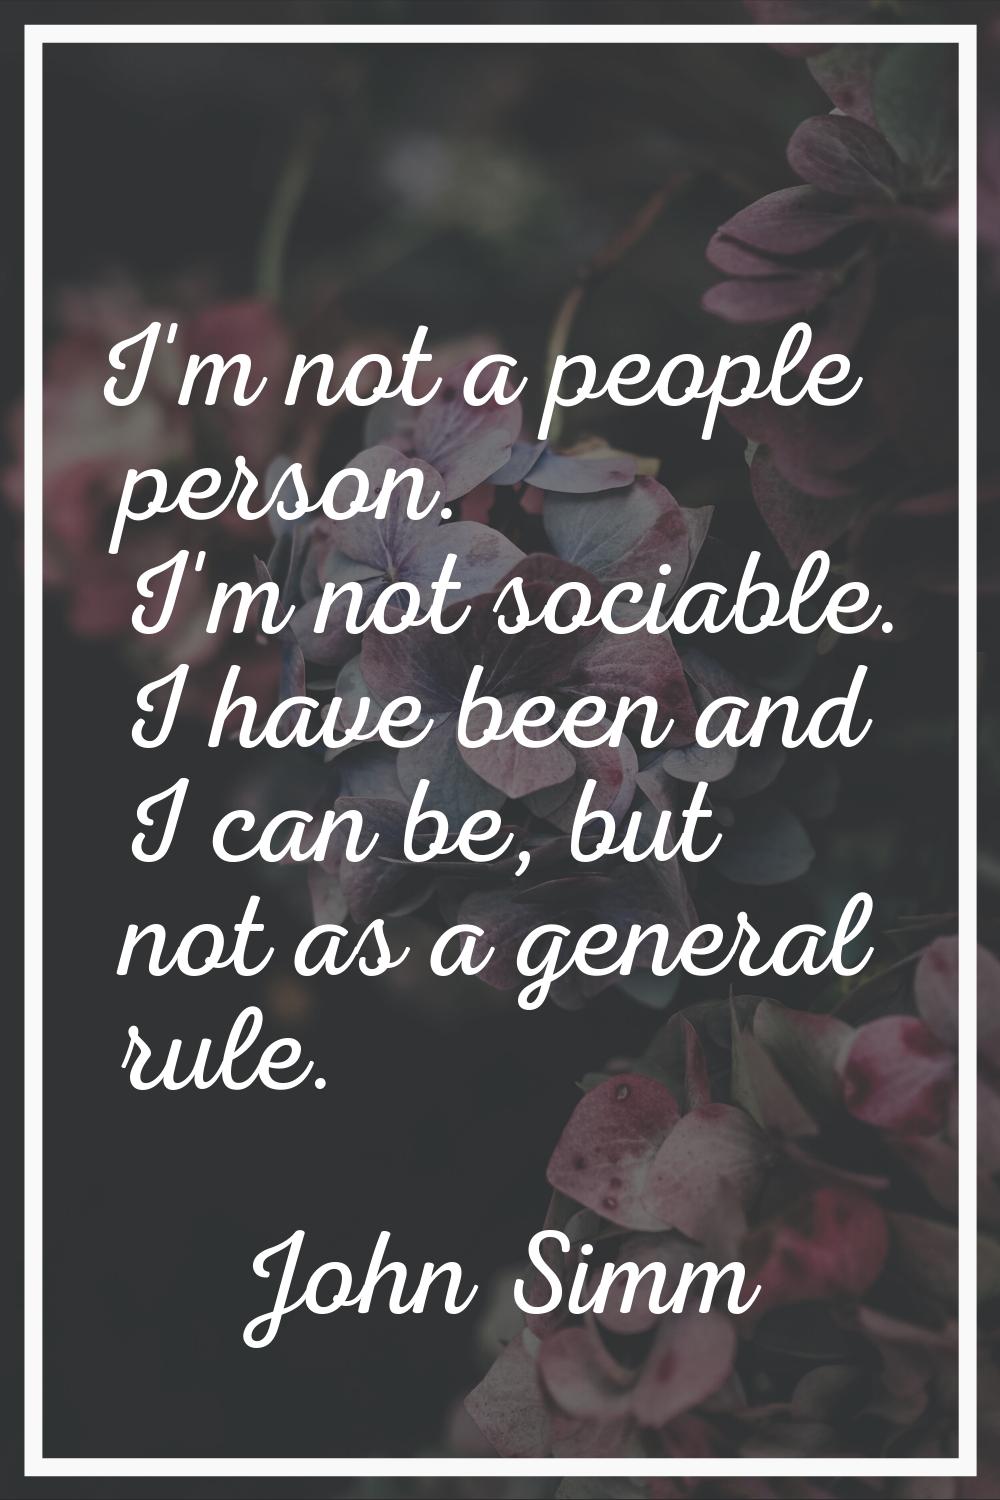 I'm not a people person. I'm not sociable. I have been and I can be, but not as a general rule.